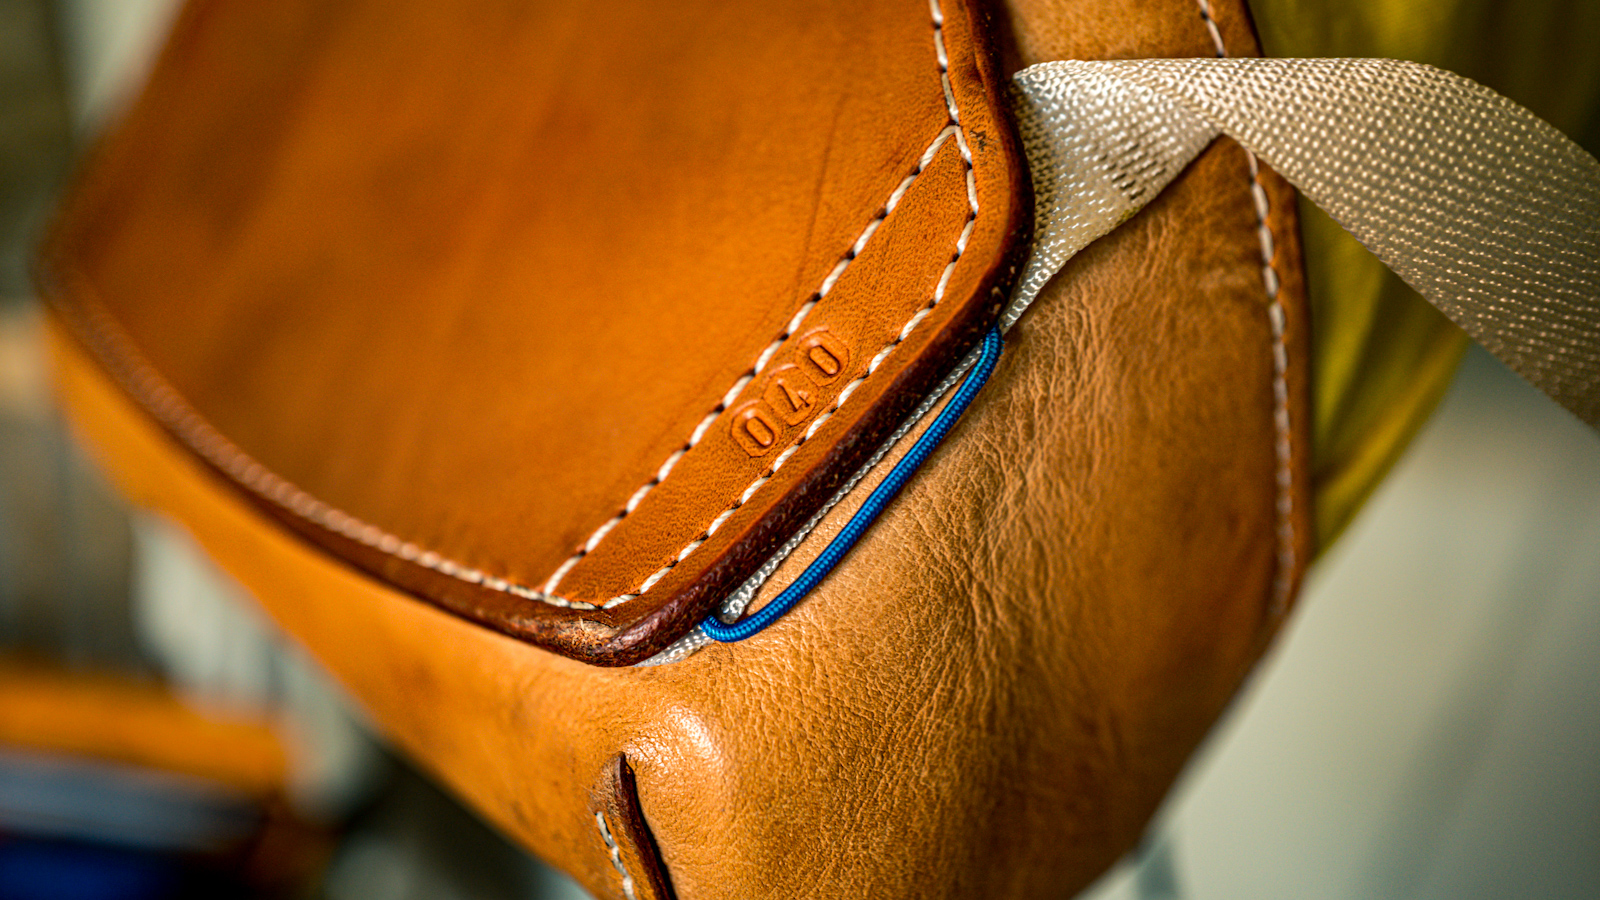 Racing Atelier Rucksack #1  The World's Most Luxurious Bespoke Backpack